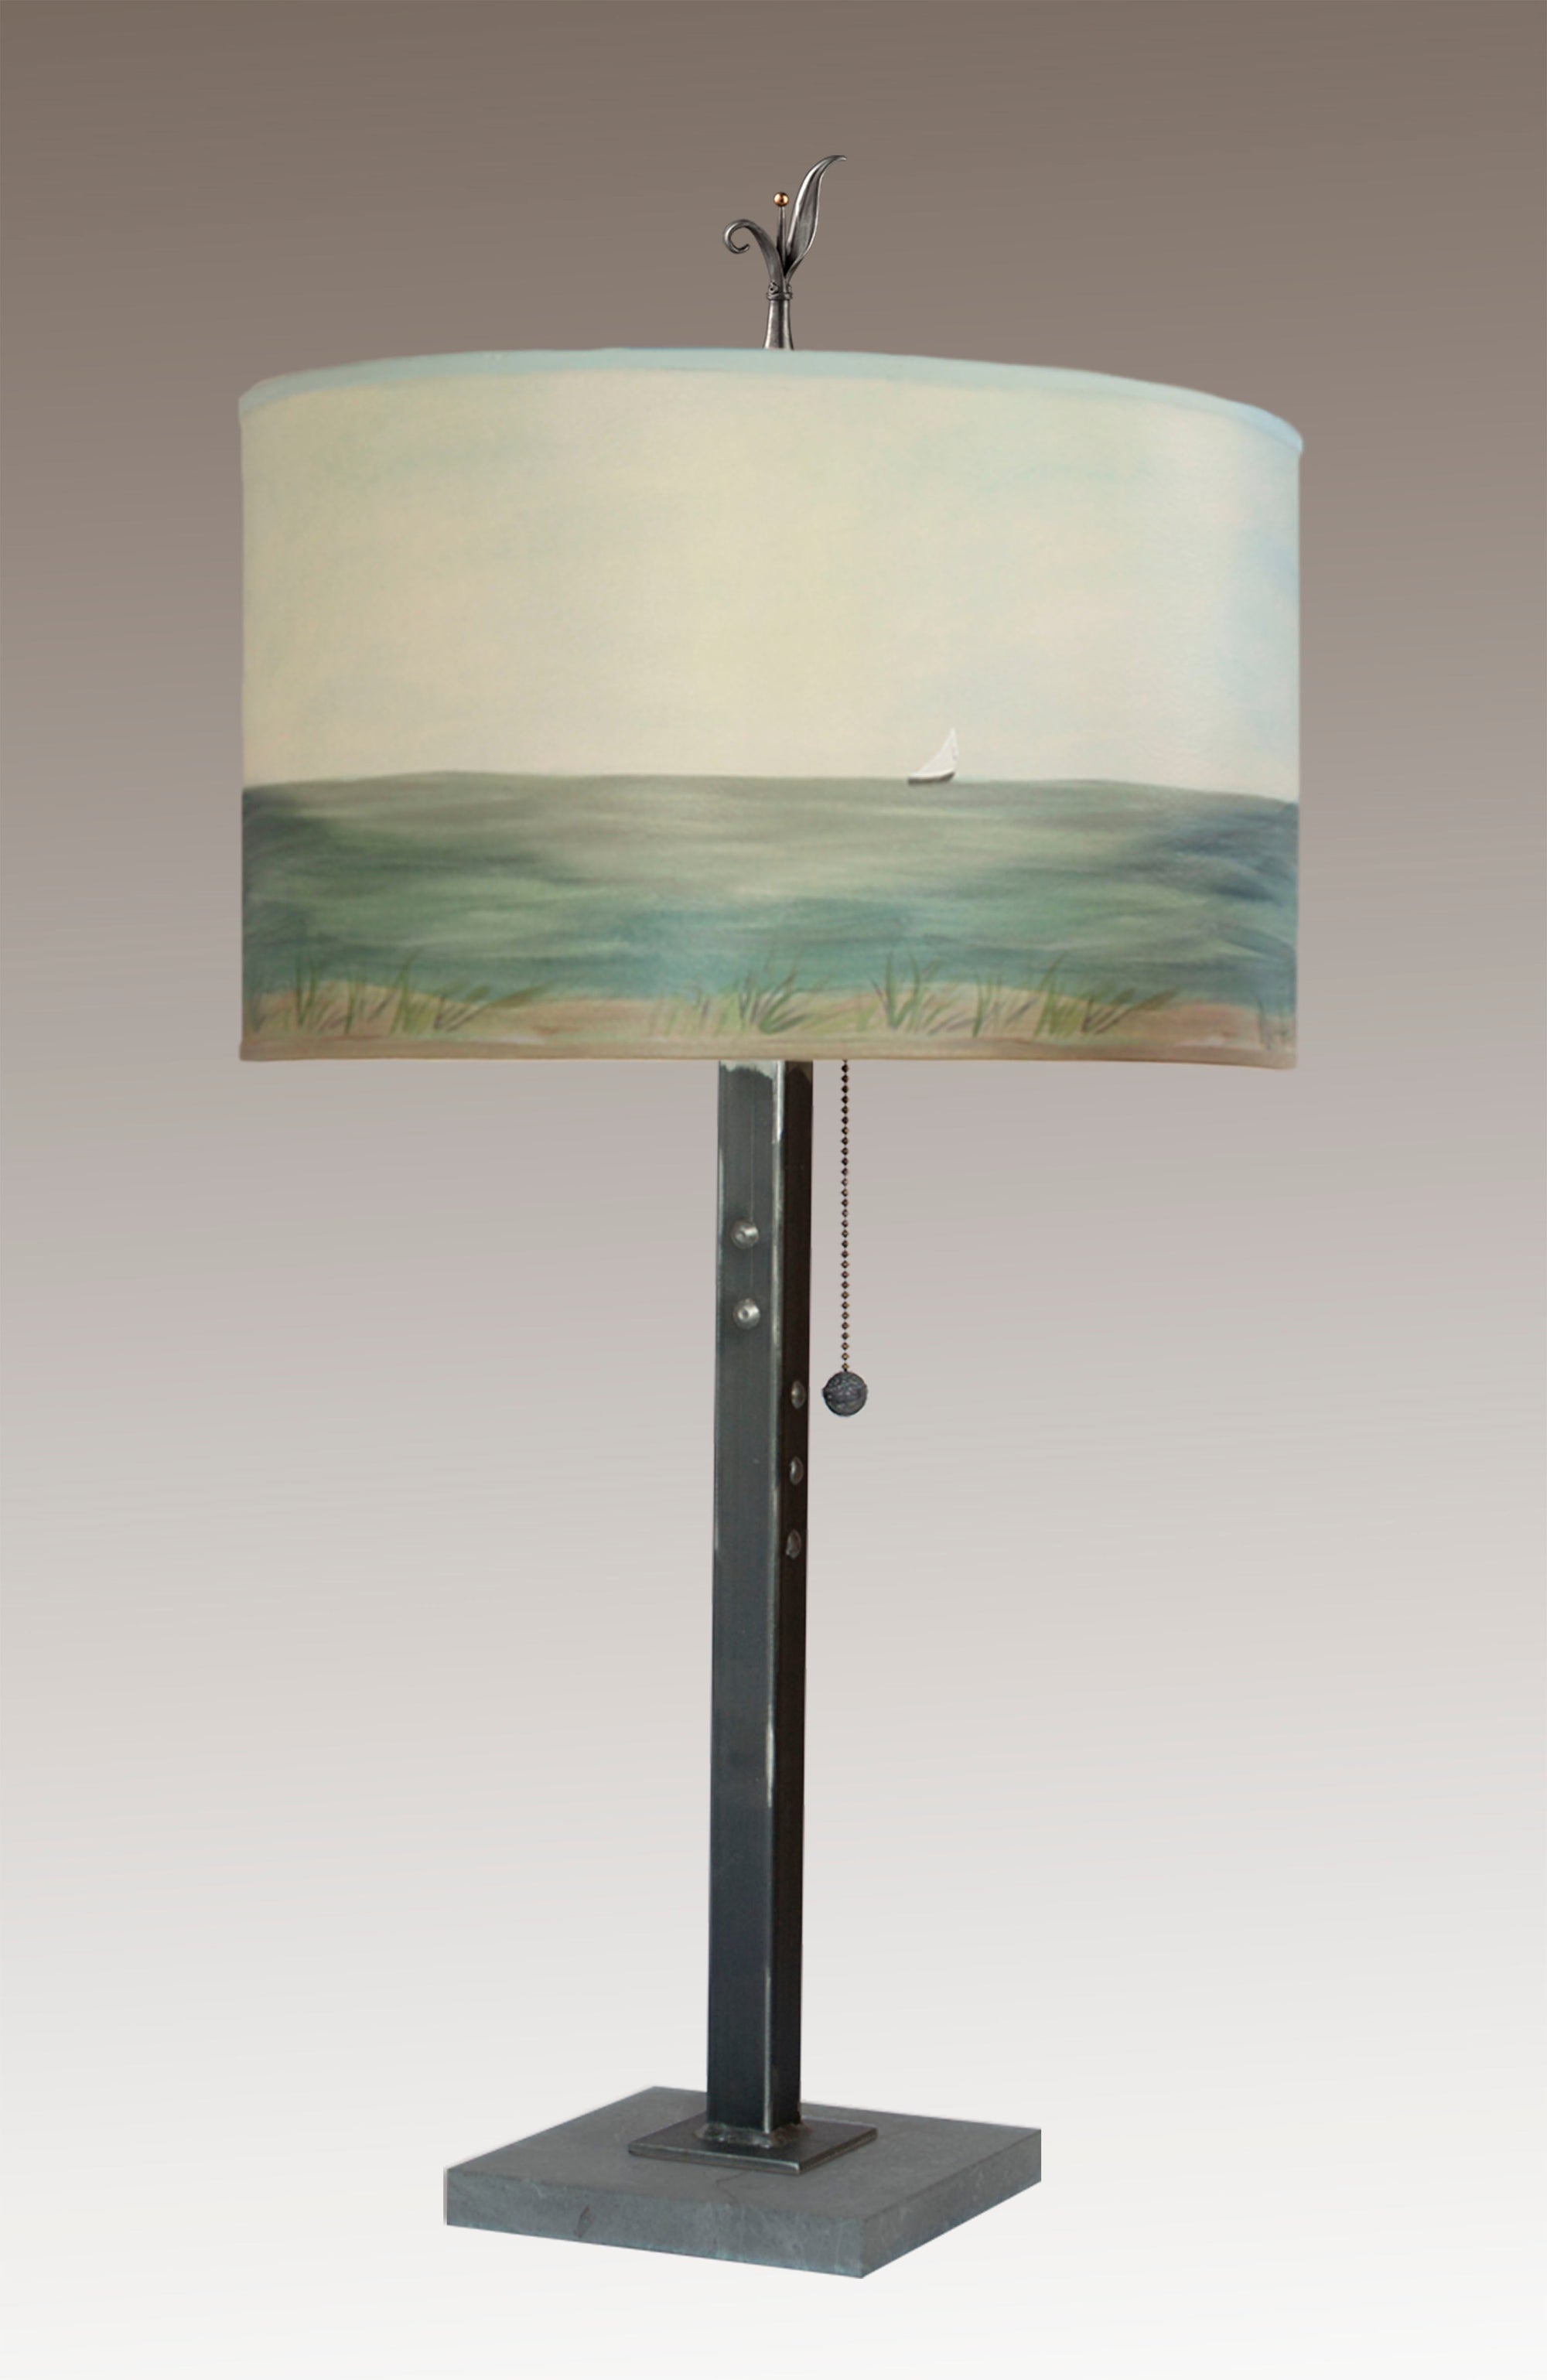 Janna Ugone & Co Table Lamps Steel Table Lamp with Large Drum Shade in Shore